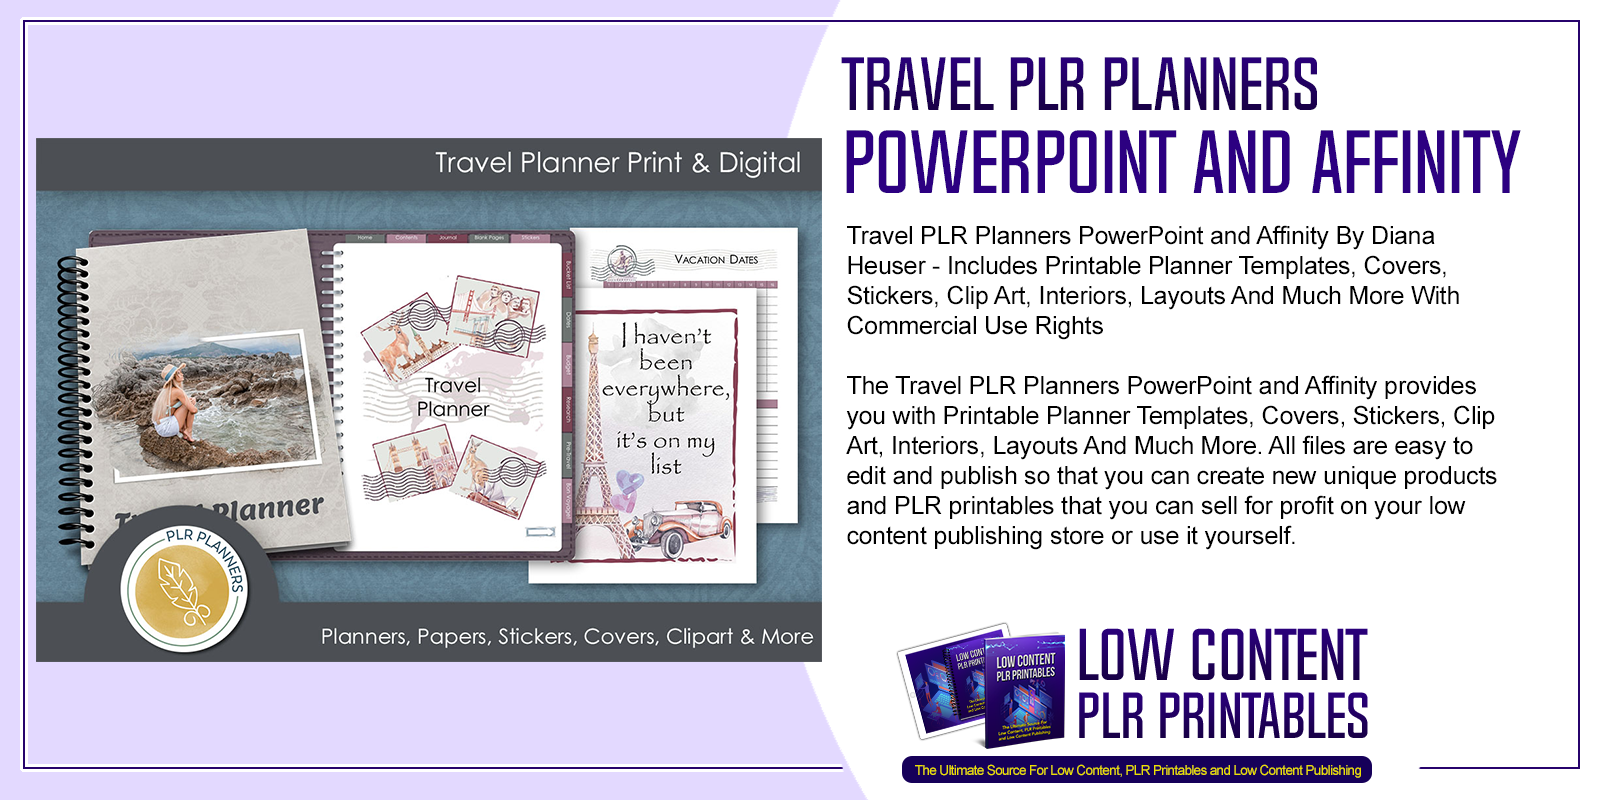 Travel PLR Planners PowerPoint and Affinity